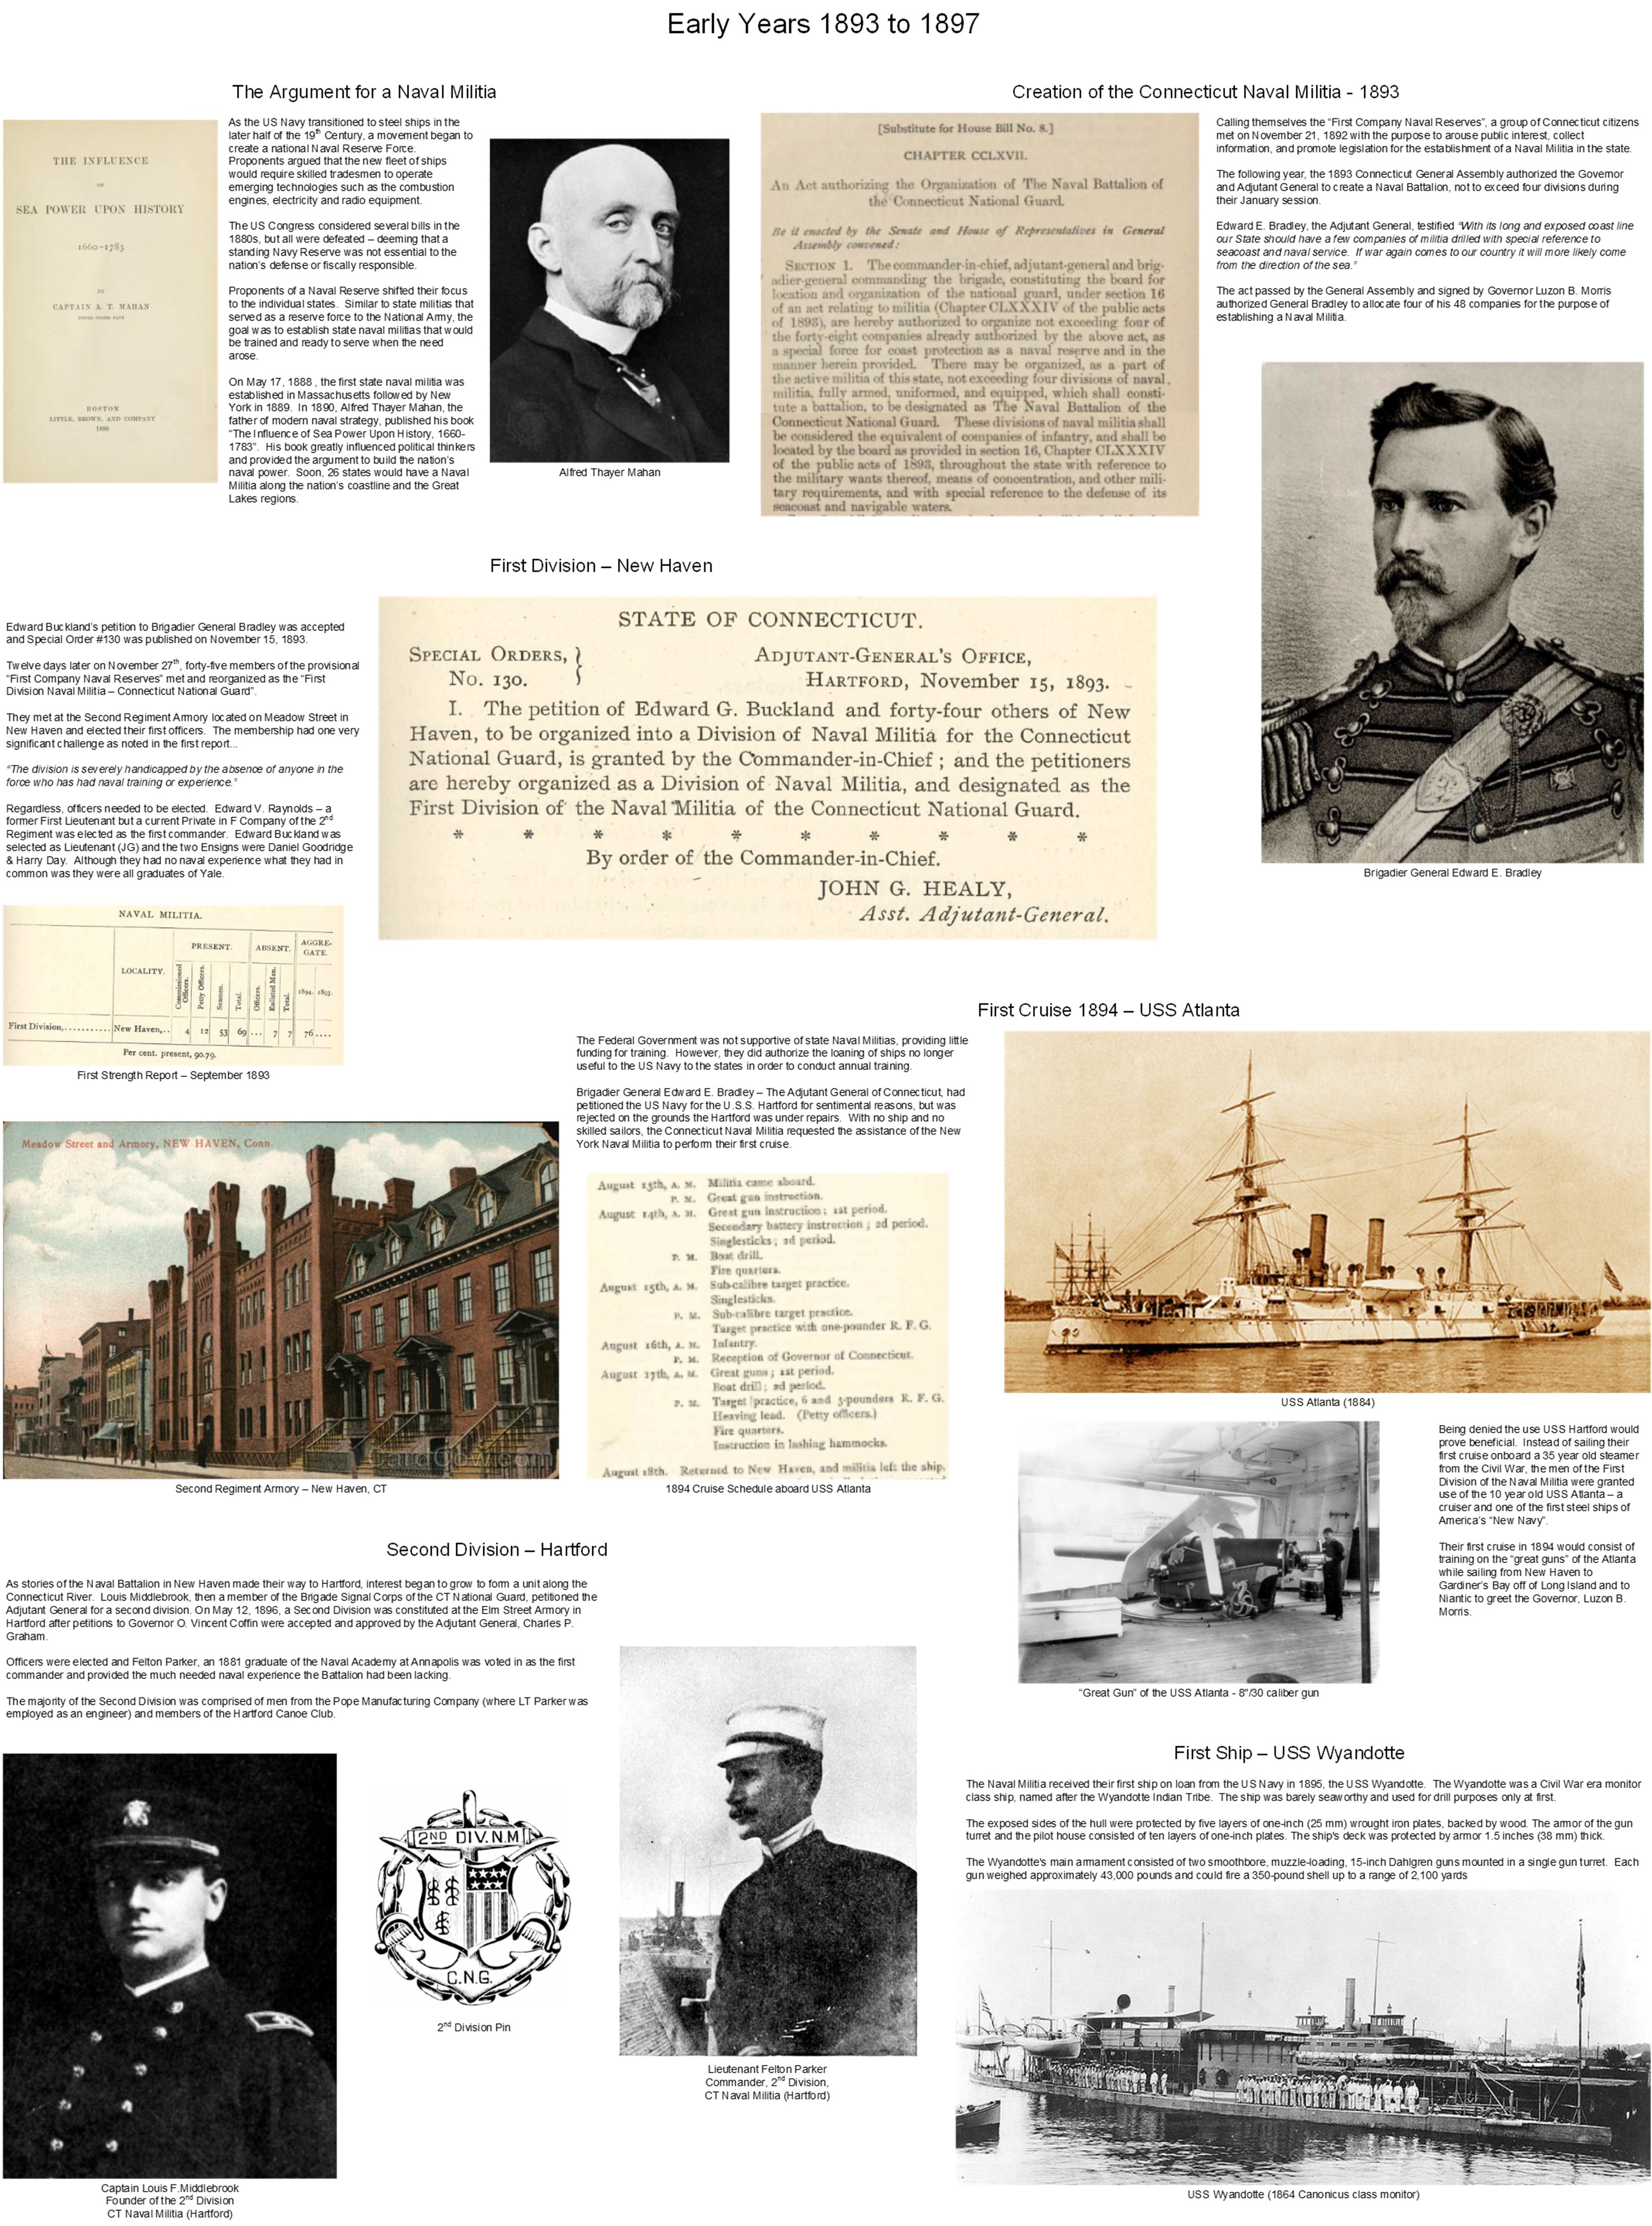 History of the Naval Militia